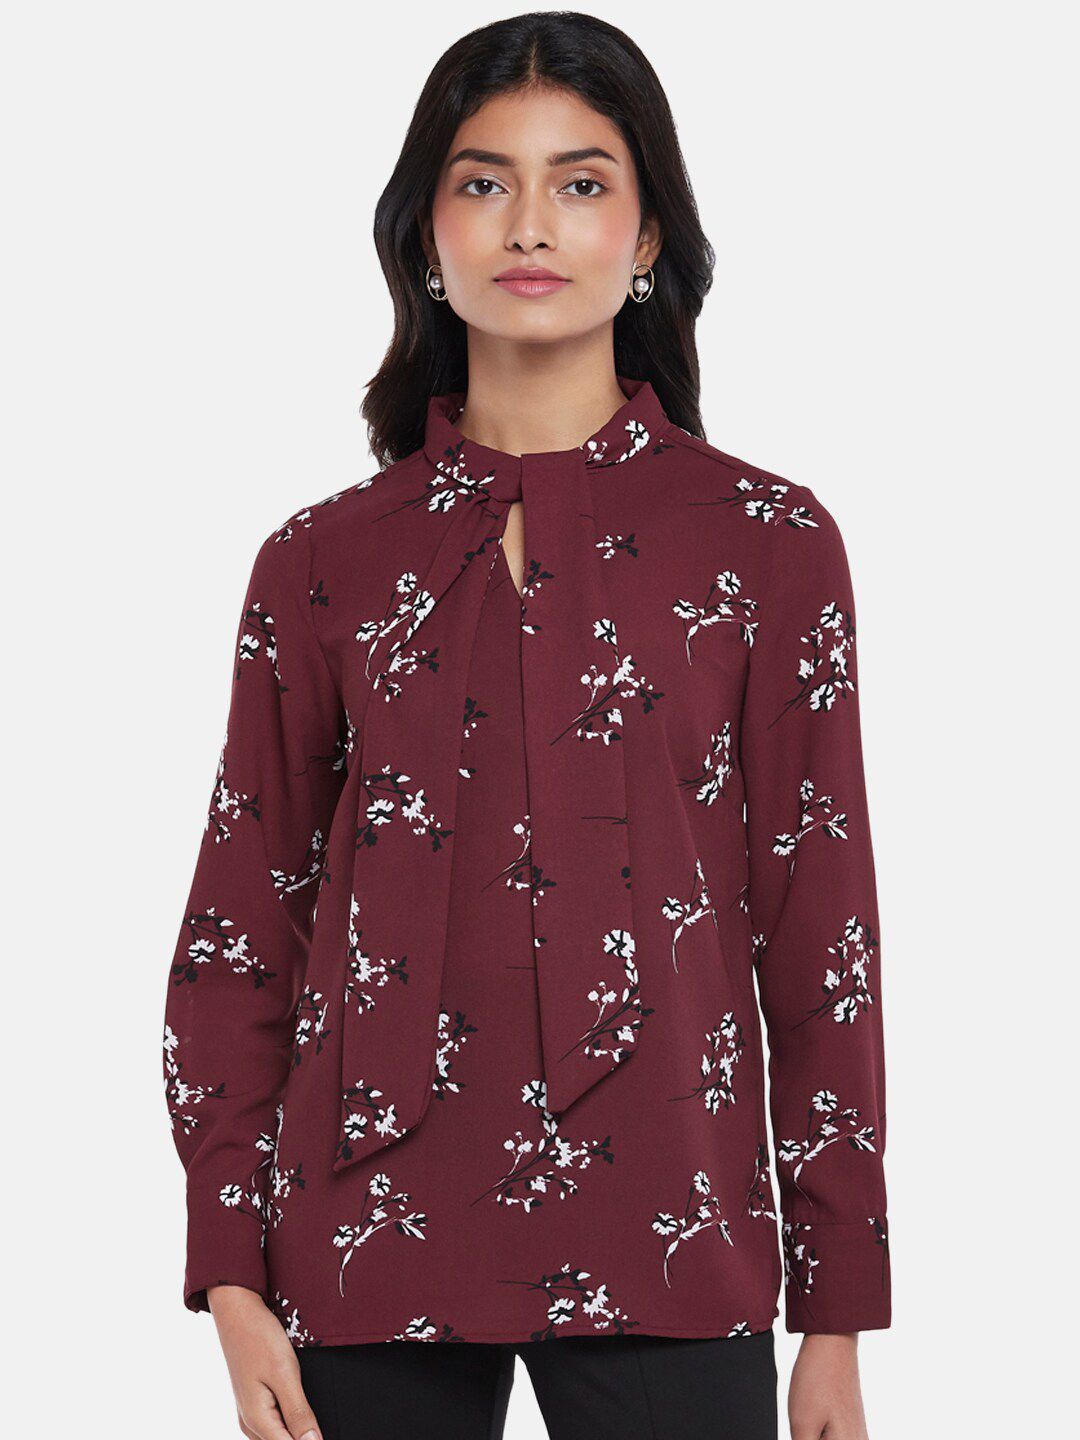 Annabelle by Pantaloons Women Maroon Floral Print Keyhole Neck Top Price in India